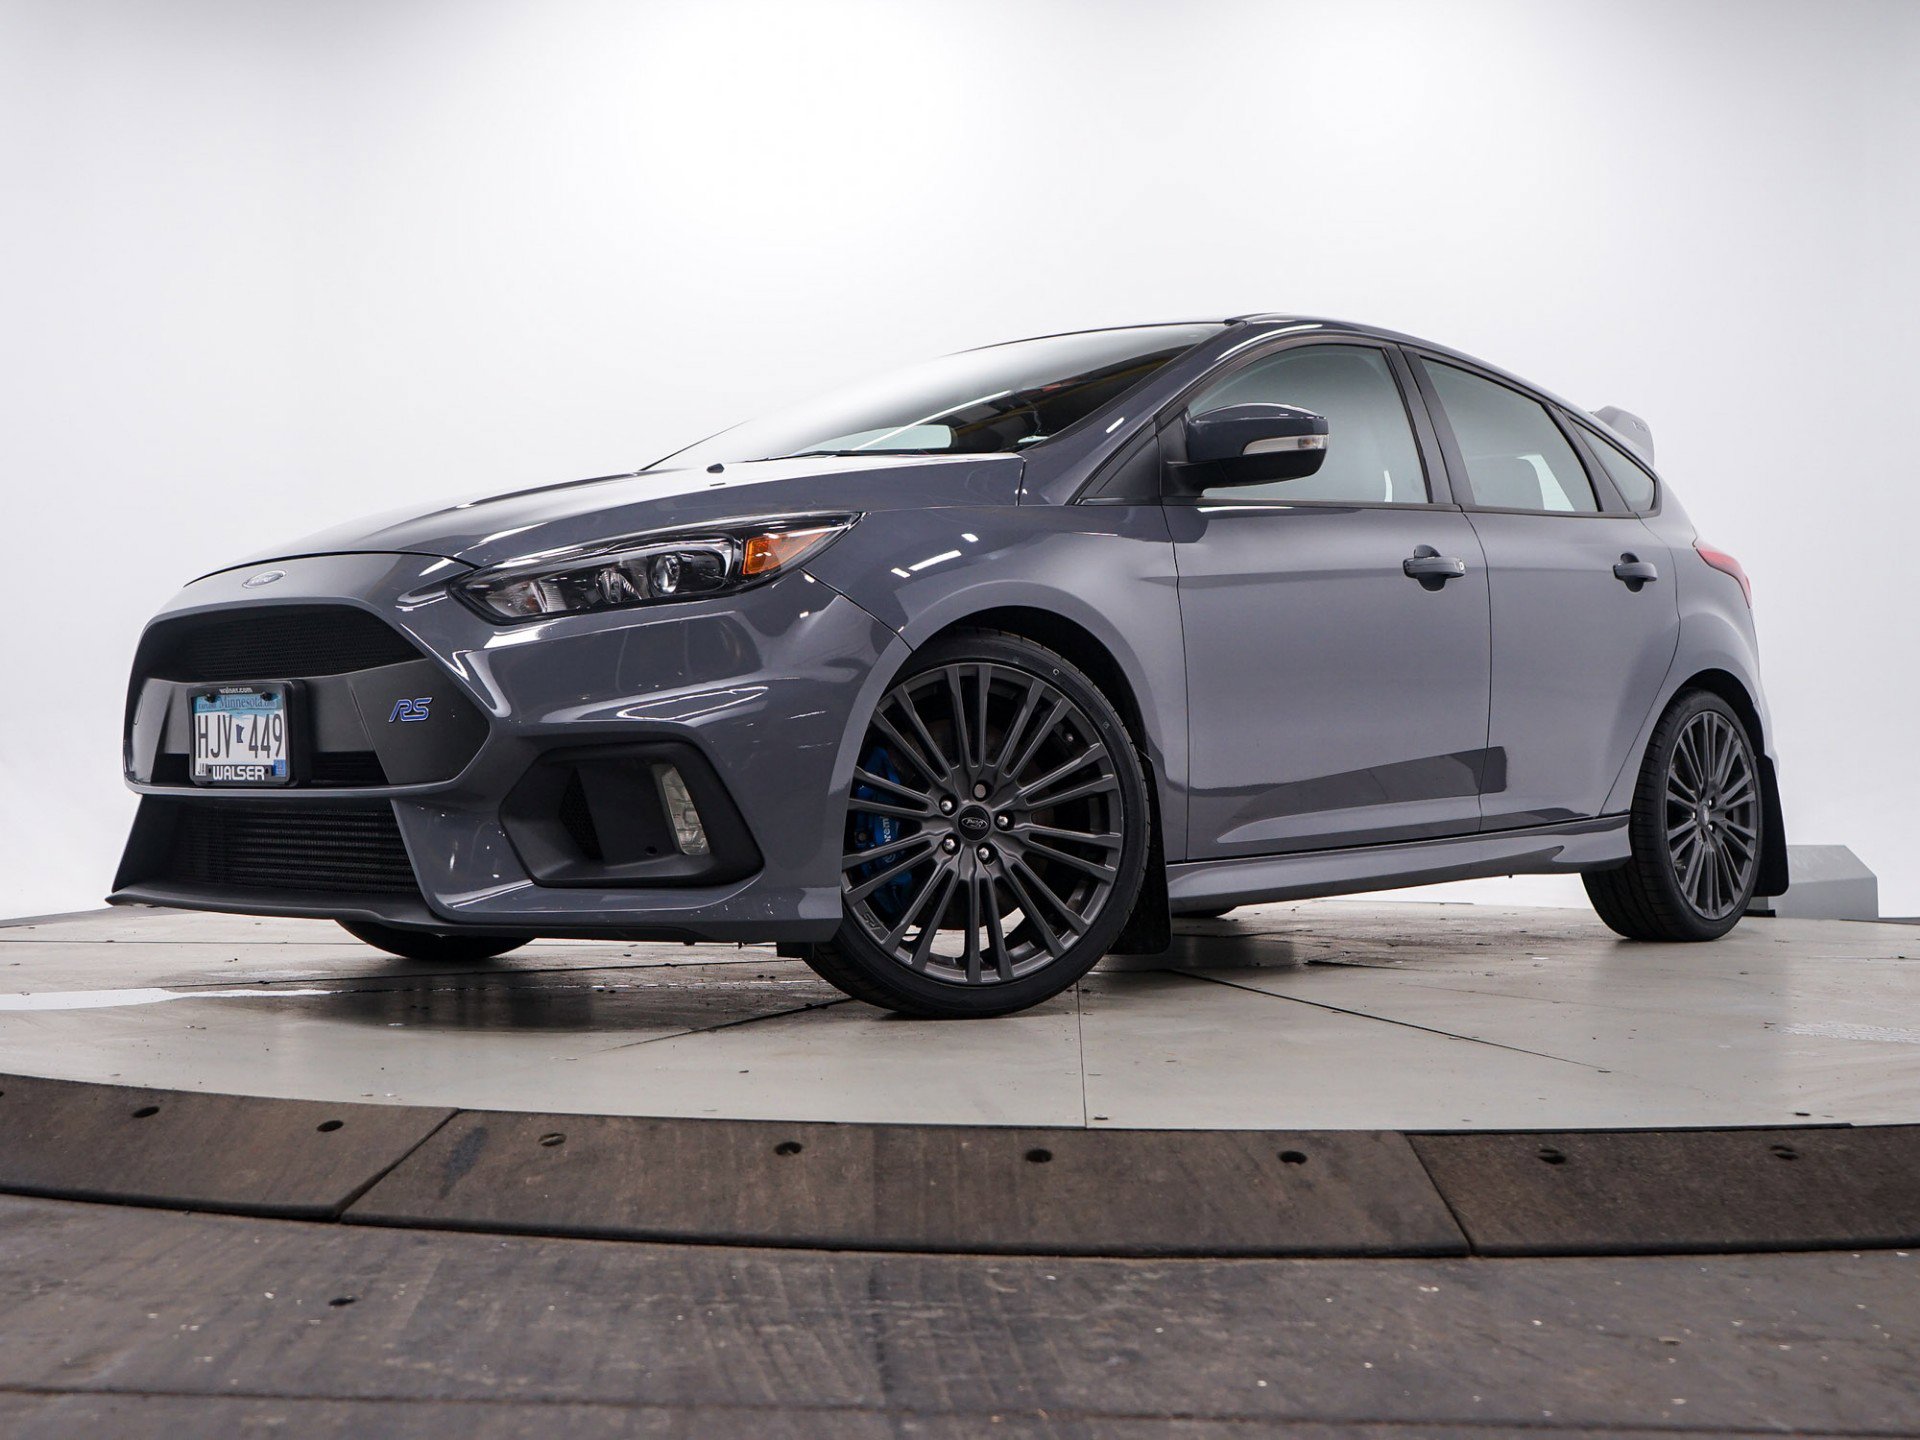 2017 Ford Focus RS in Coon Rapids #7AL307T | Walser Nissan Coon Rapids